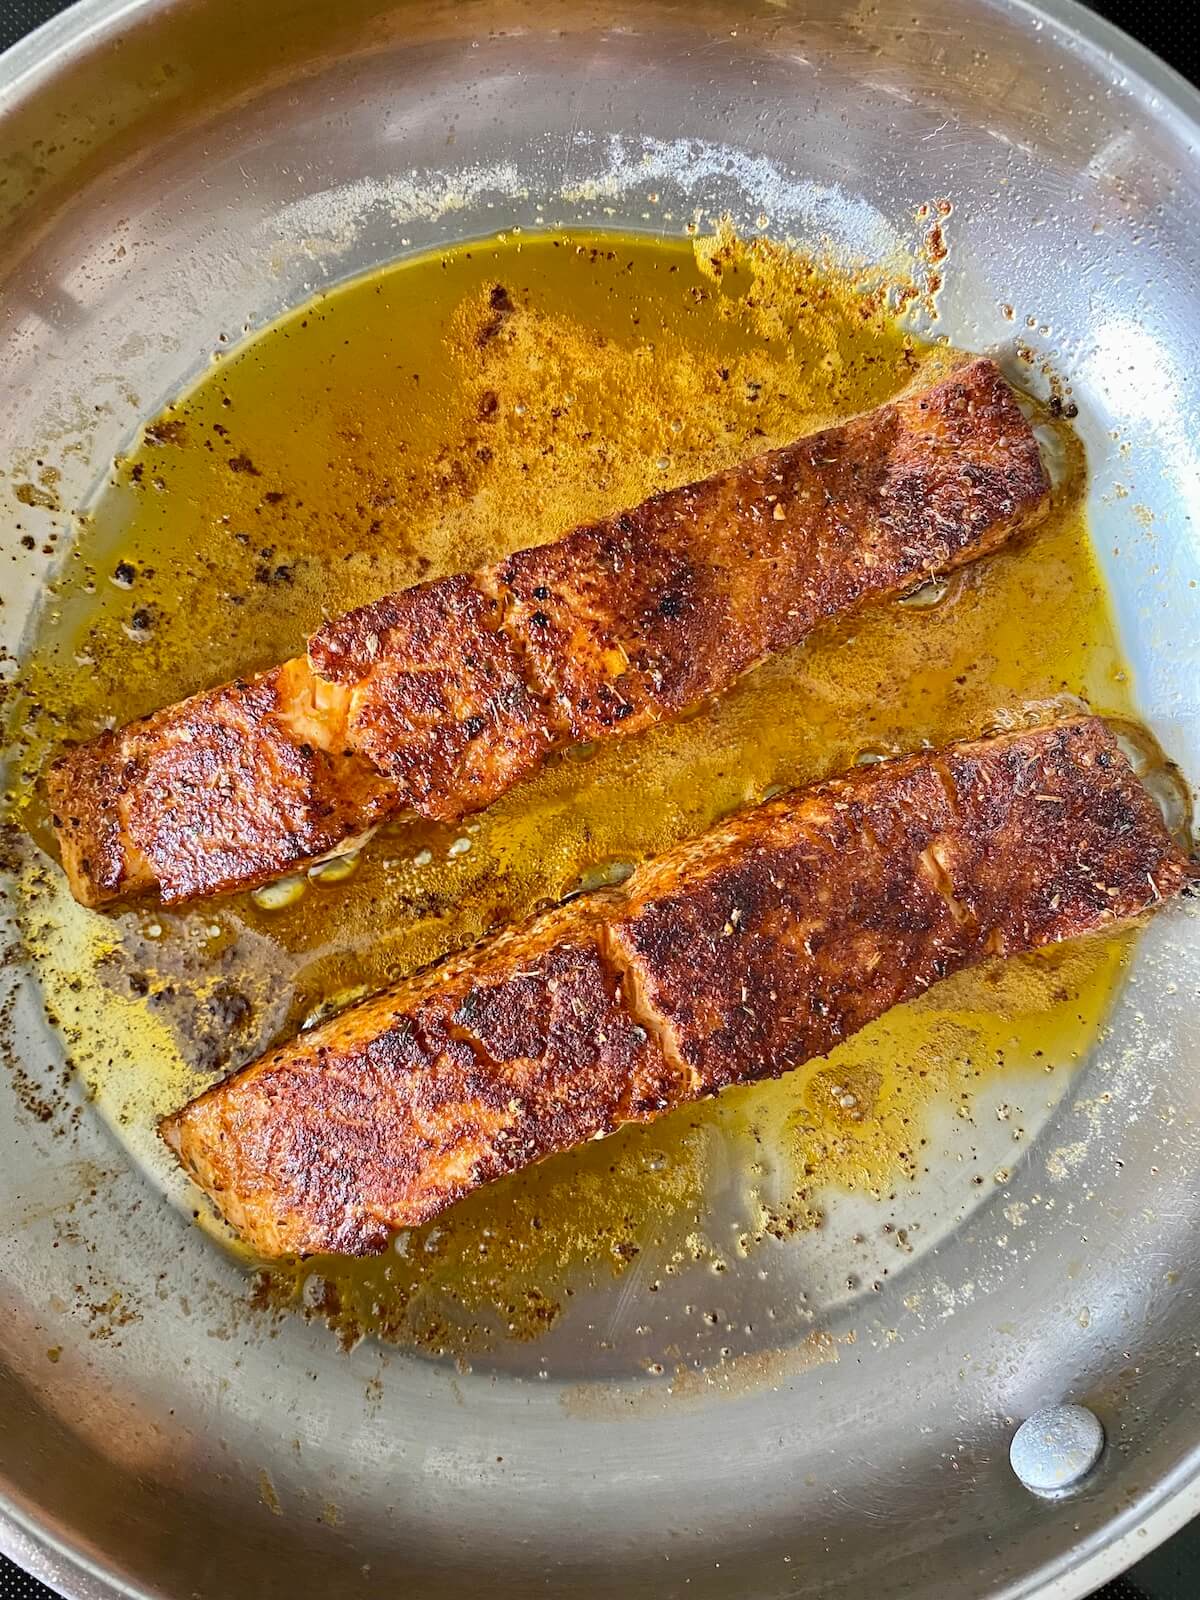 Blackened Cajun salmon being seared in a stainless steel frying pan.